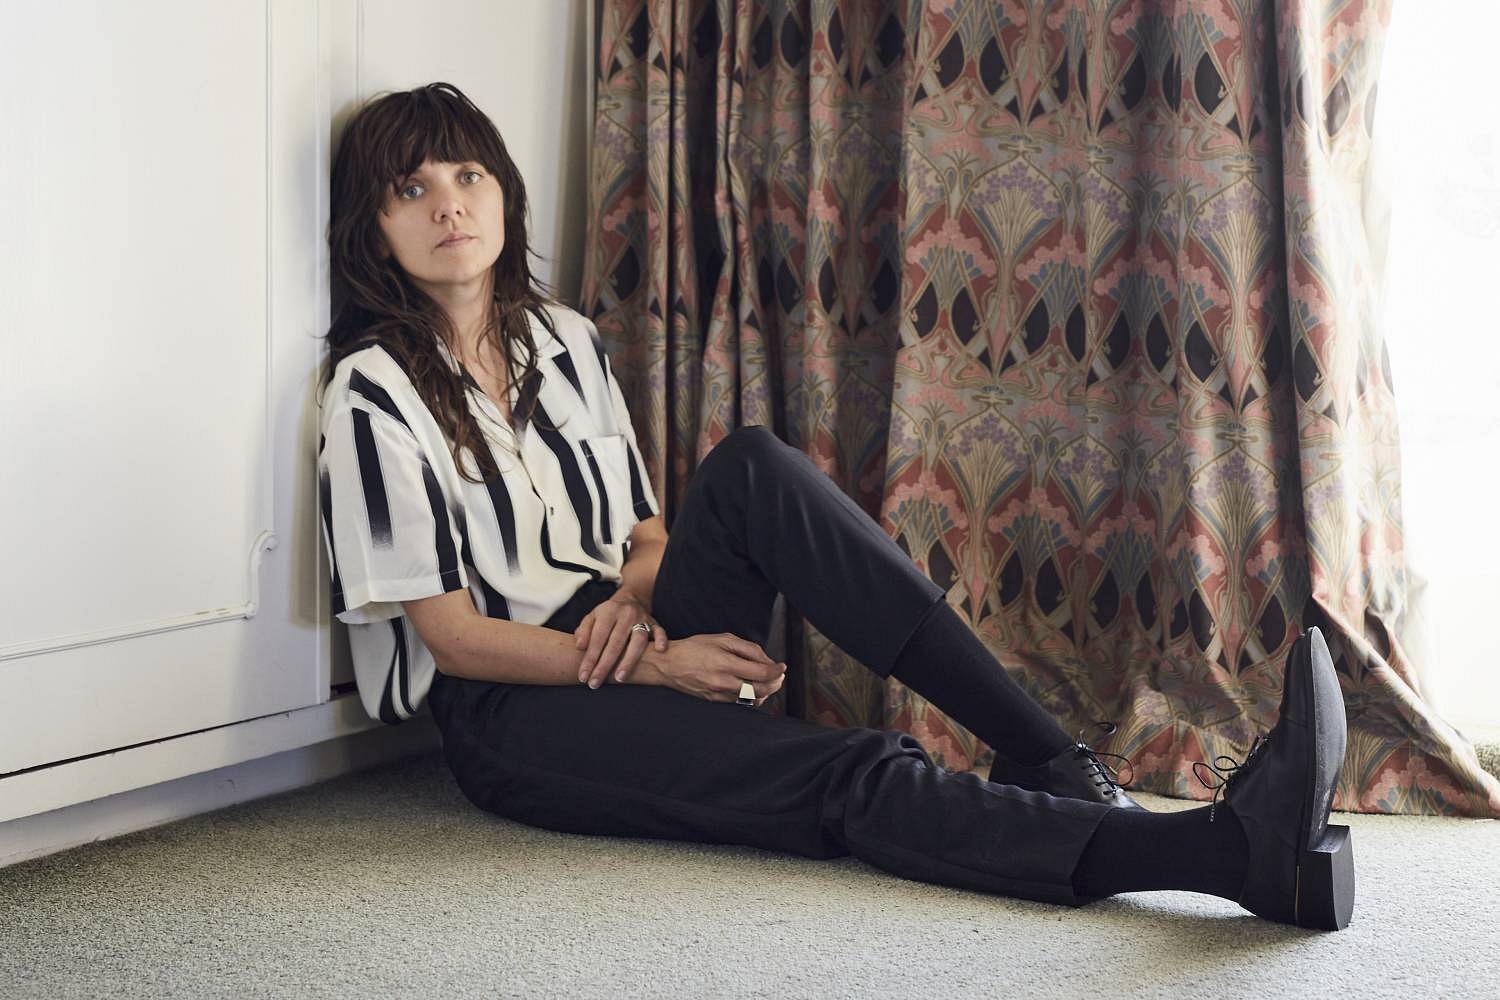 Courtney Barnett shares new song 'Write A List of Things to Look Forward To'